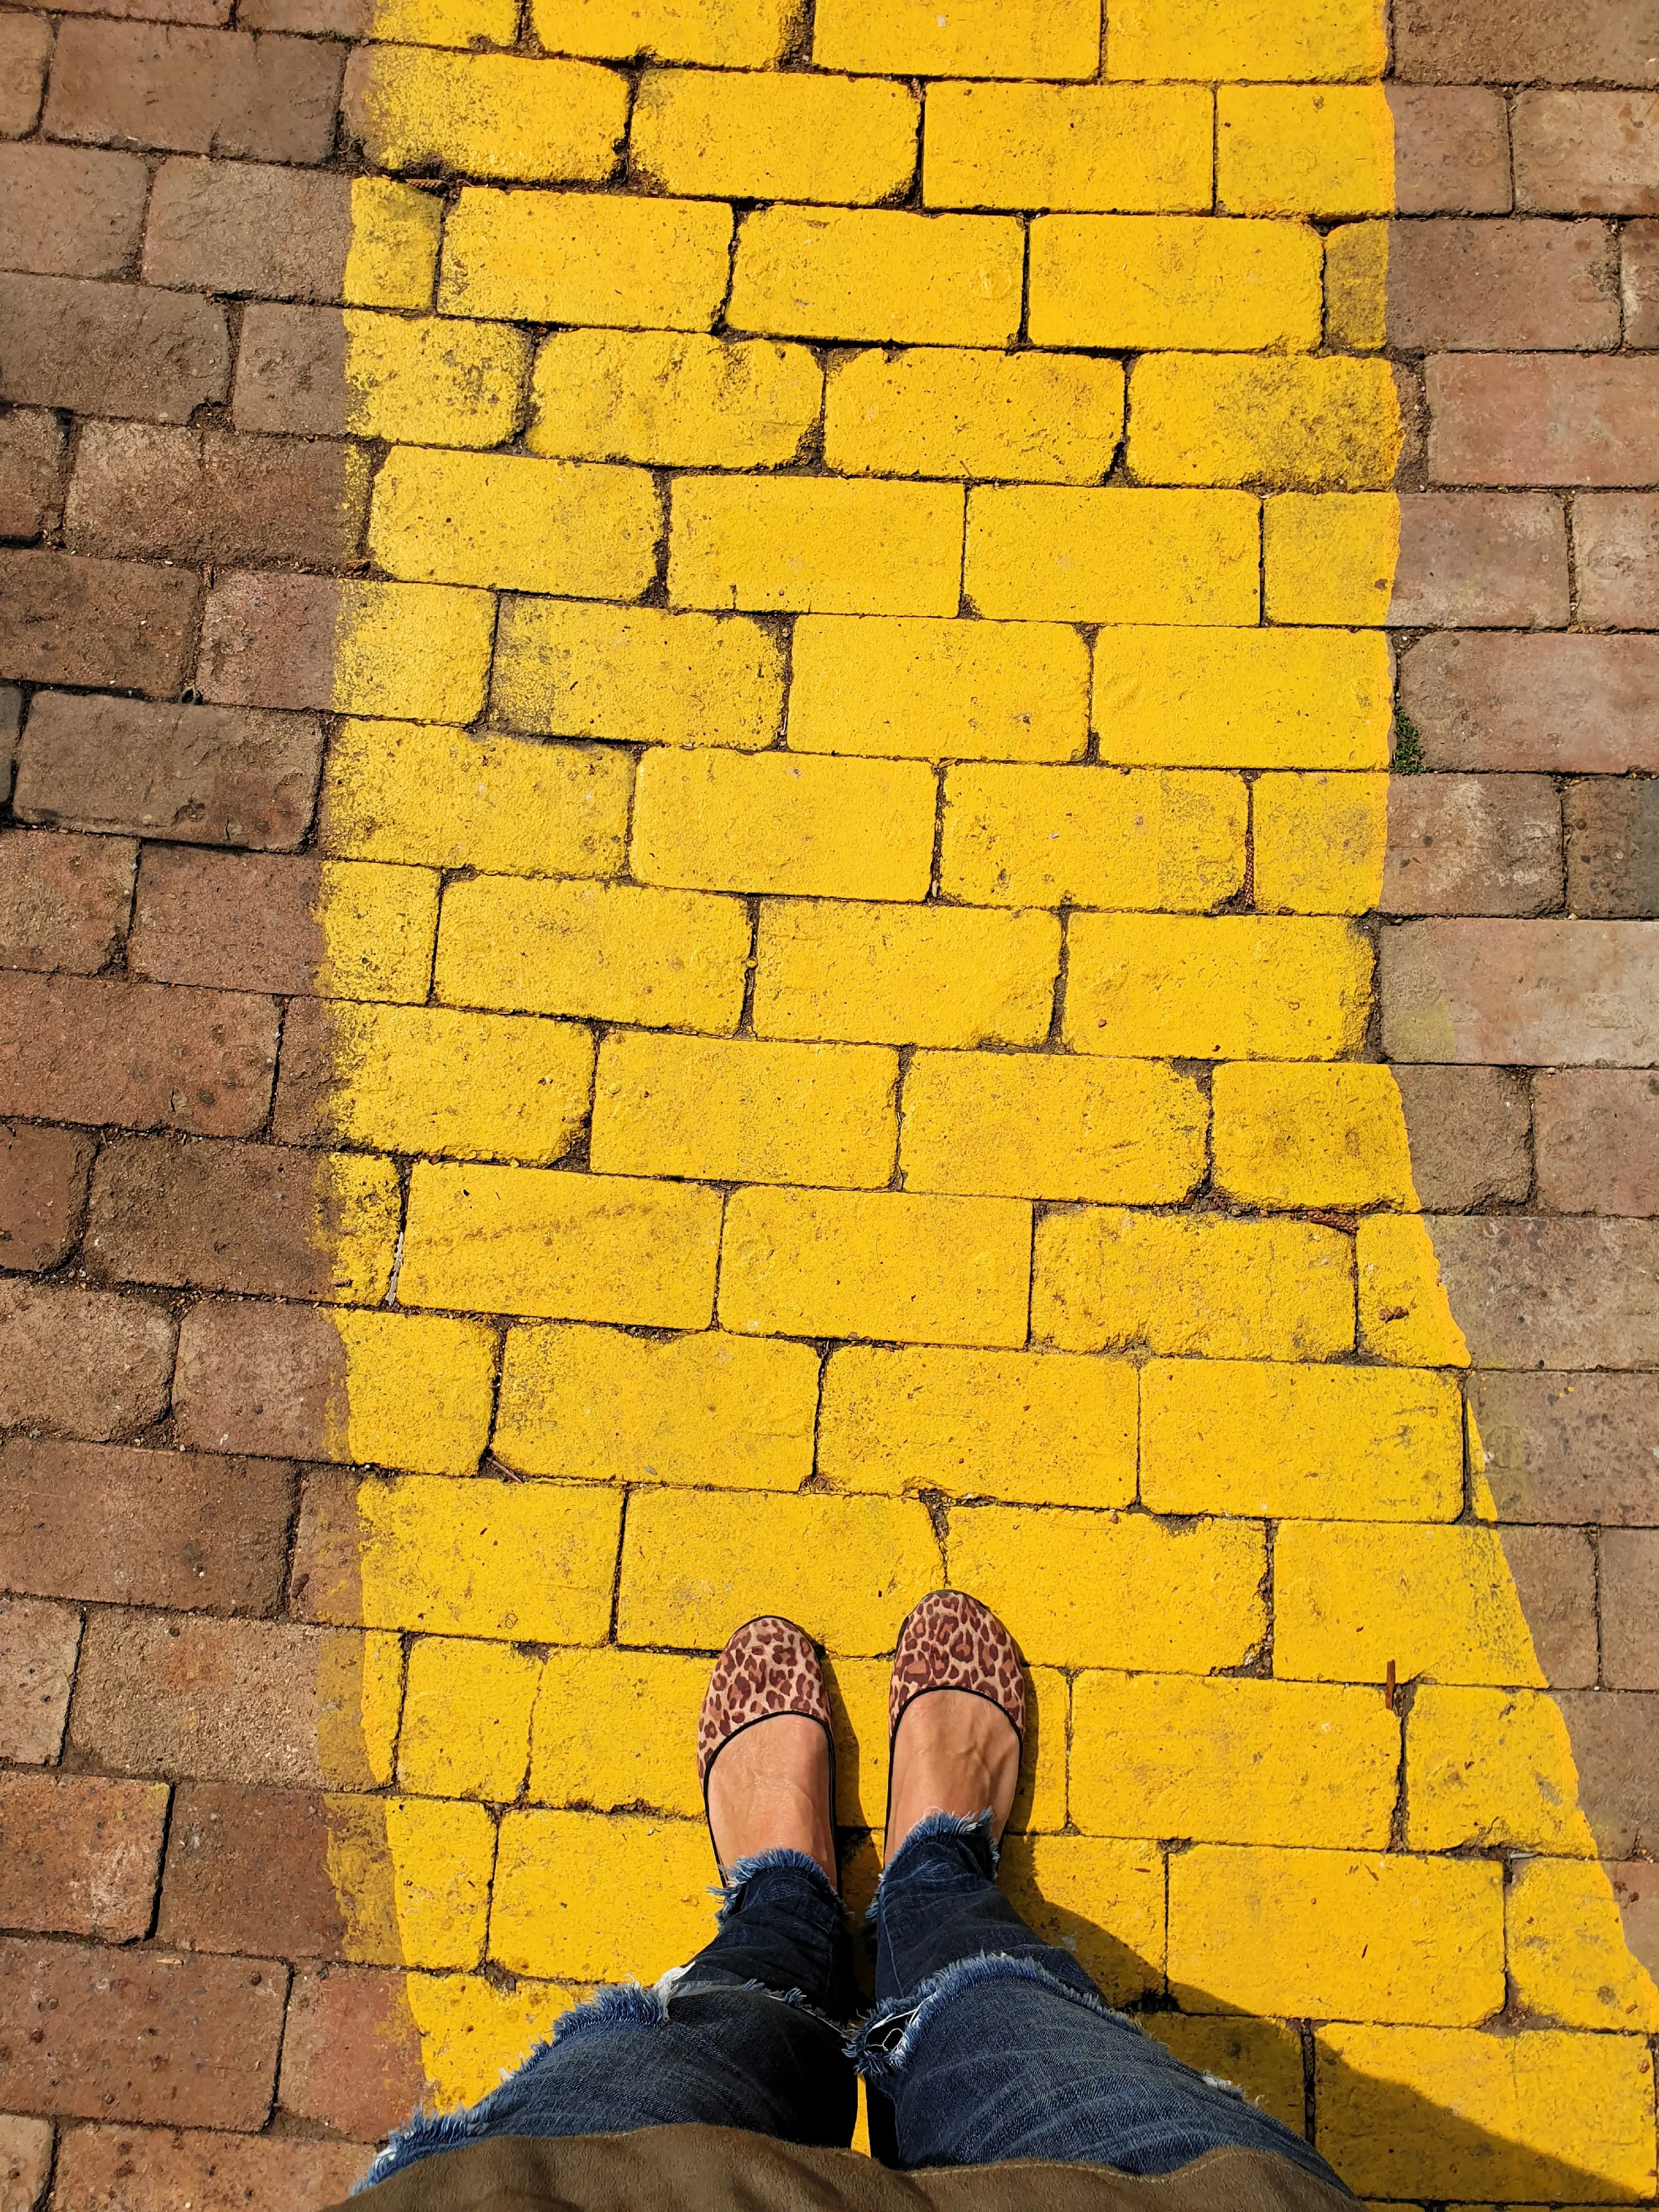 A pair of feet in leopard-print shoes standing on a yellow stripe running the length of a brick road.